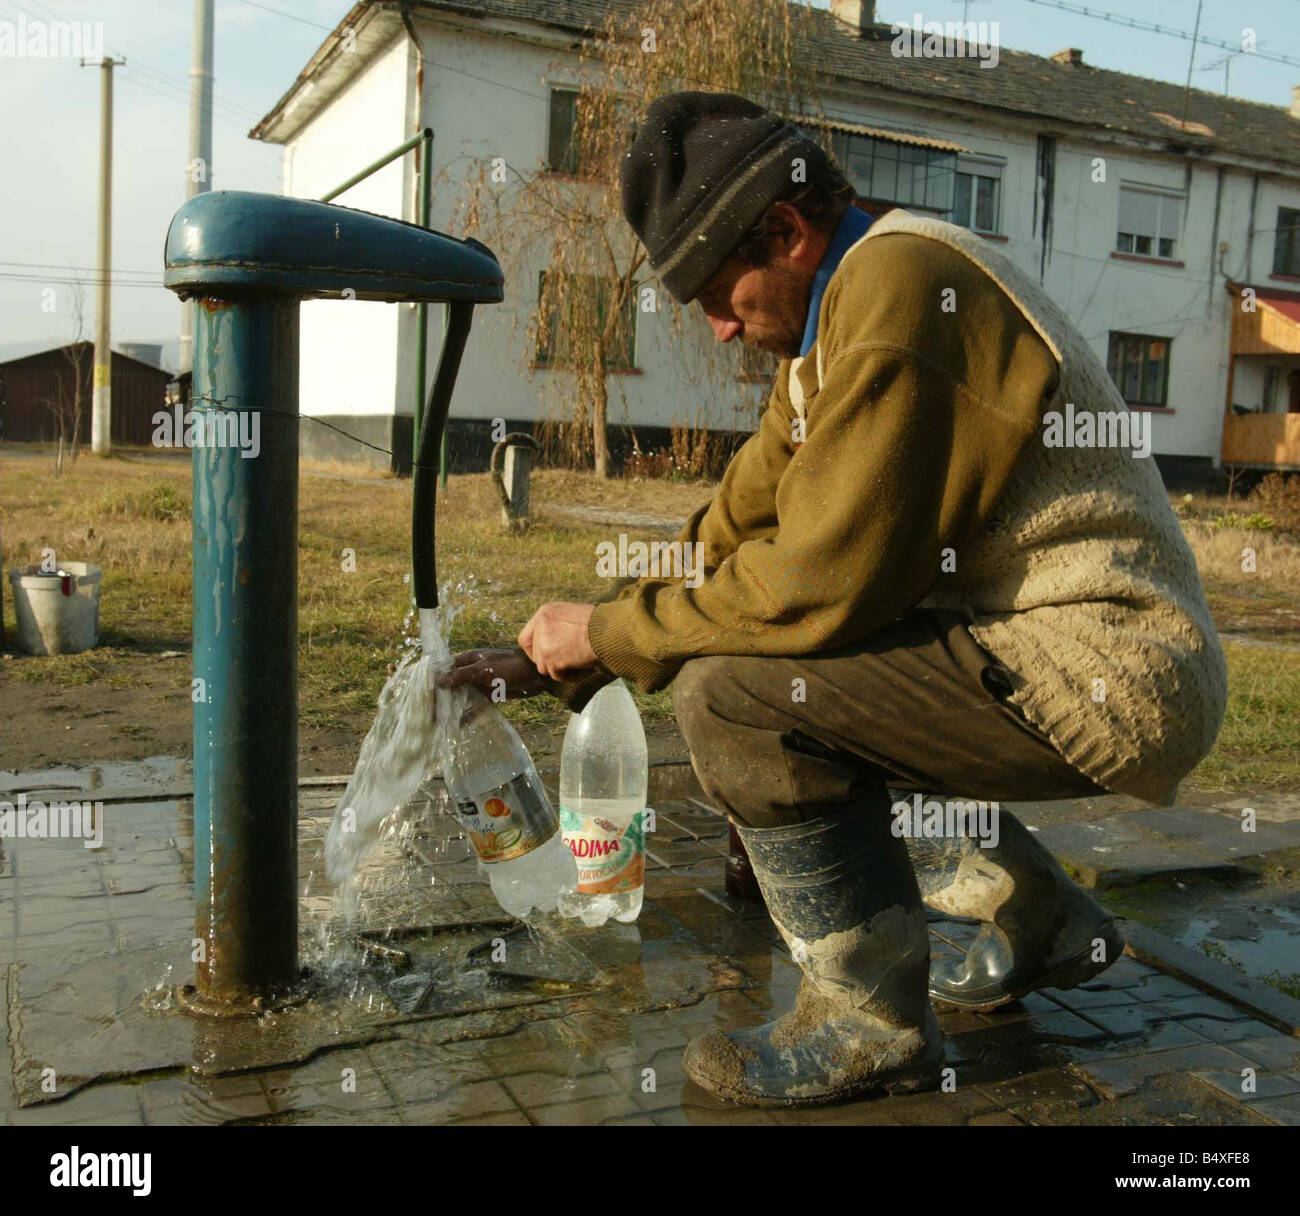 Copsa Mica Romania November 2006 Copsa Mica Europe s most polluted place a man fills up his water bottles from the local tap the water is polluted Stock Photo